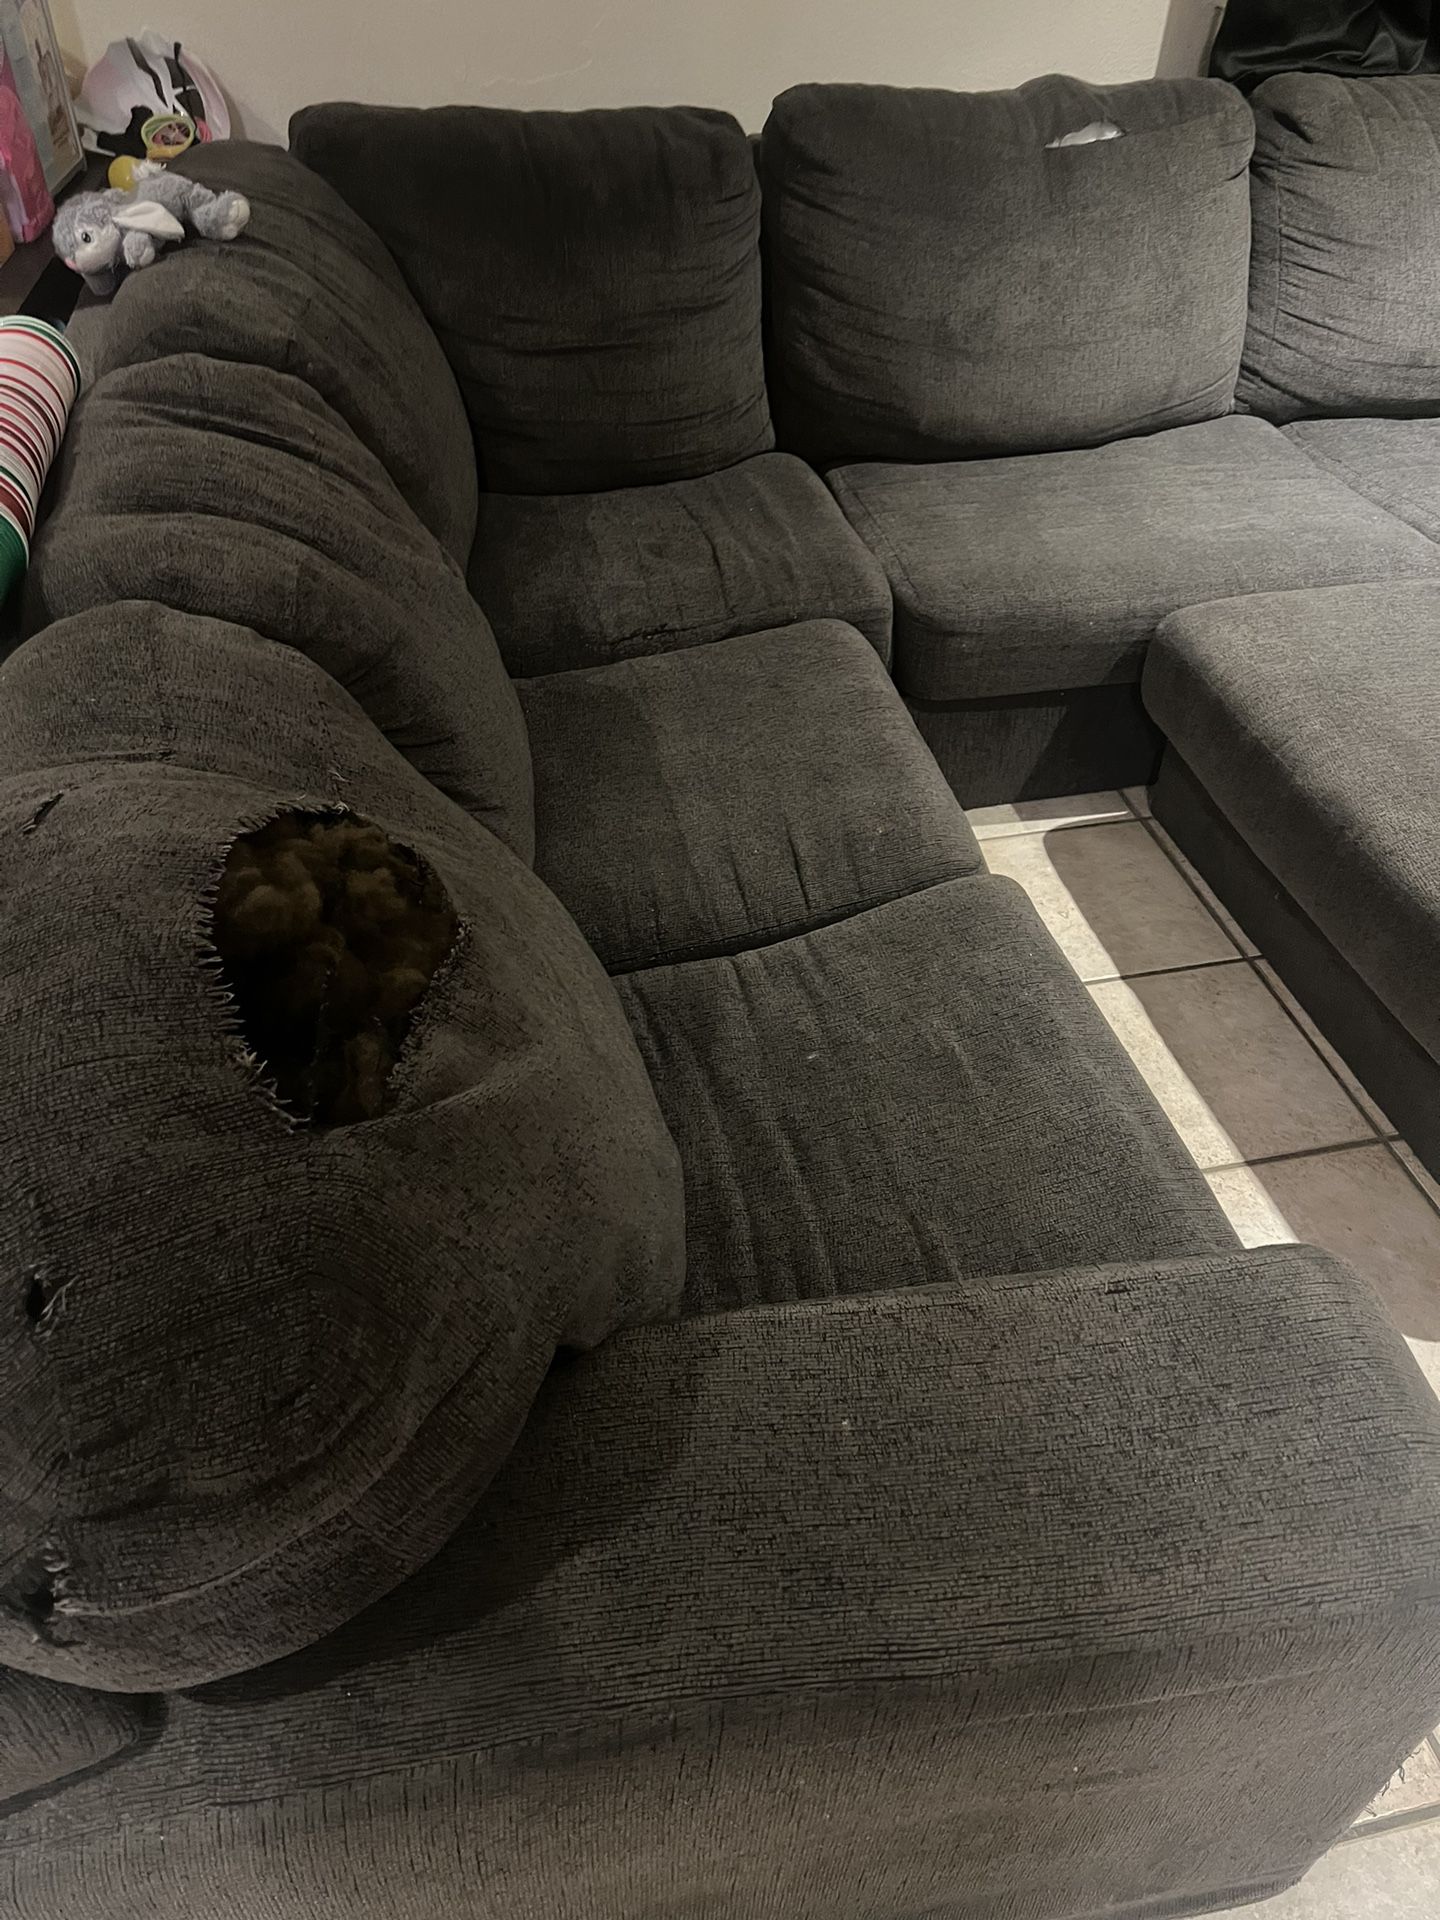 FREE sectional Couch